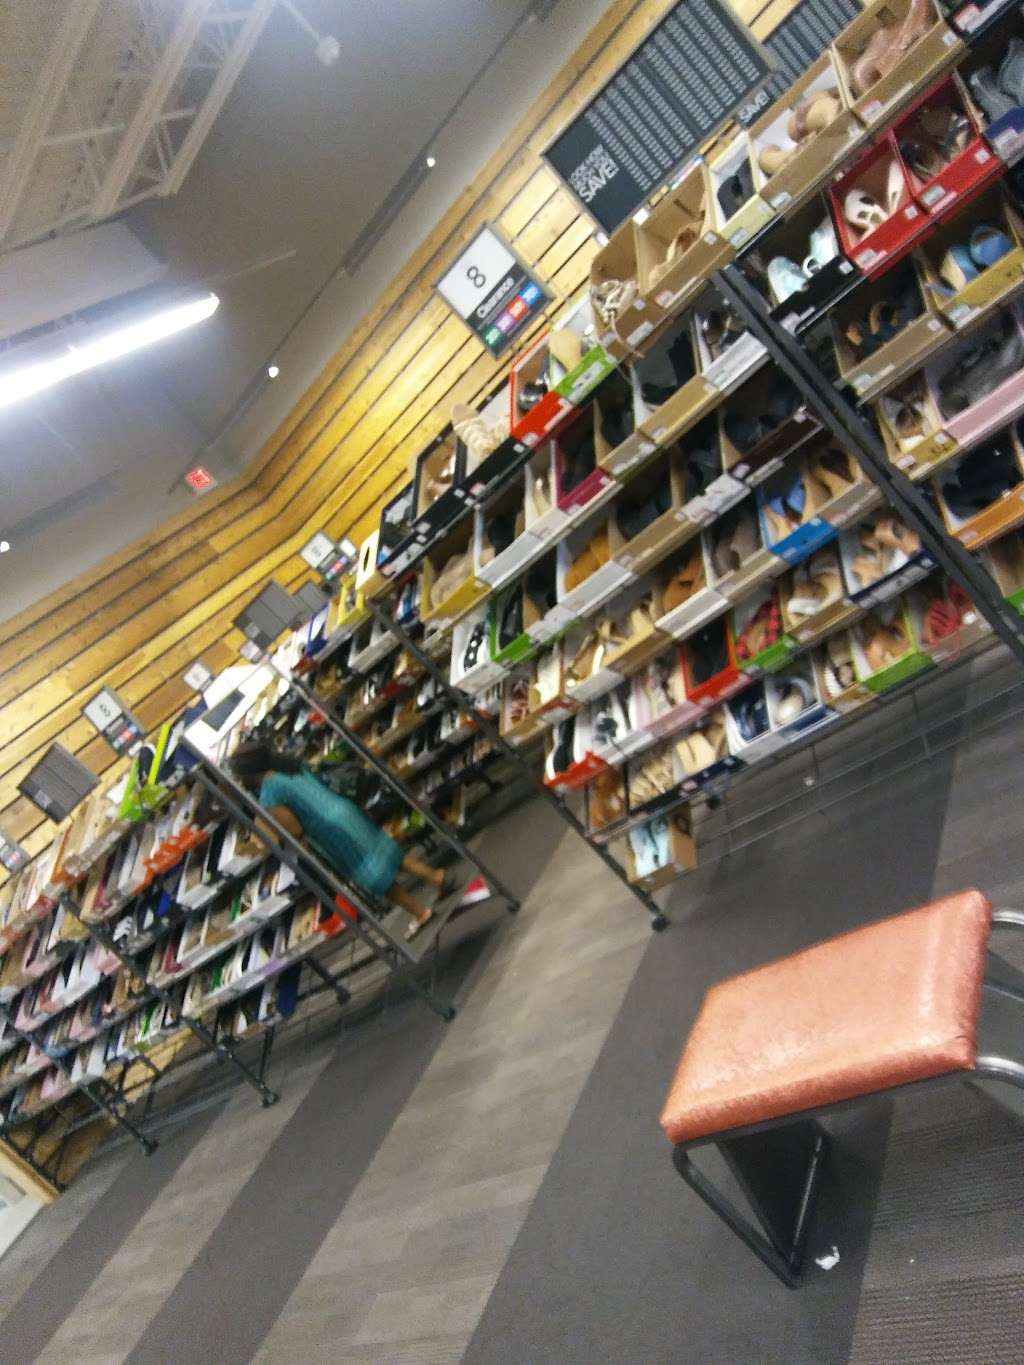 DSW Designer Shoe Warehouse | 1725 Ritchie Station Ct, Capitol Heights, MD 20743 | Phone: (240) 716-7103